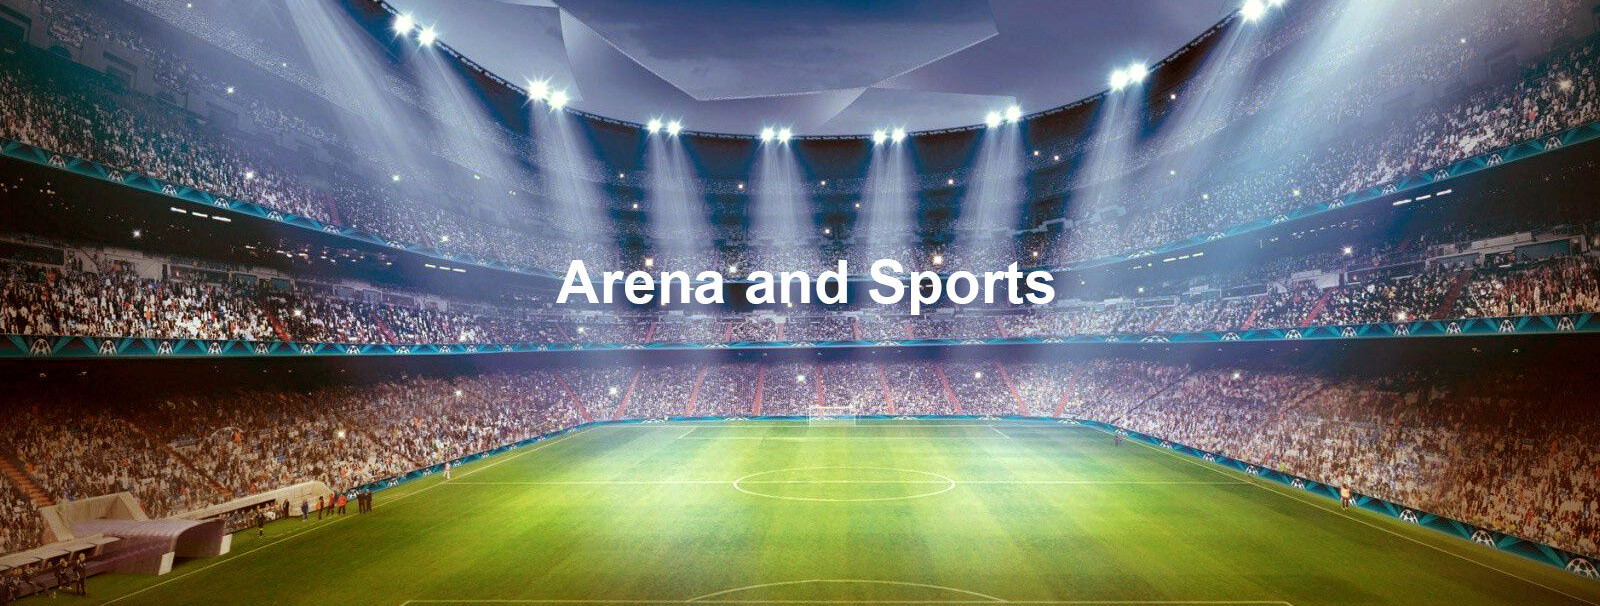 Arena and Sports - LED Tube